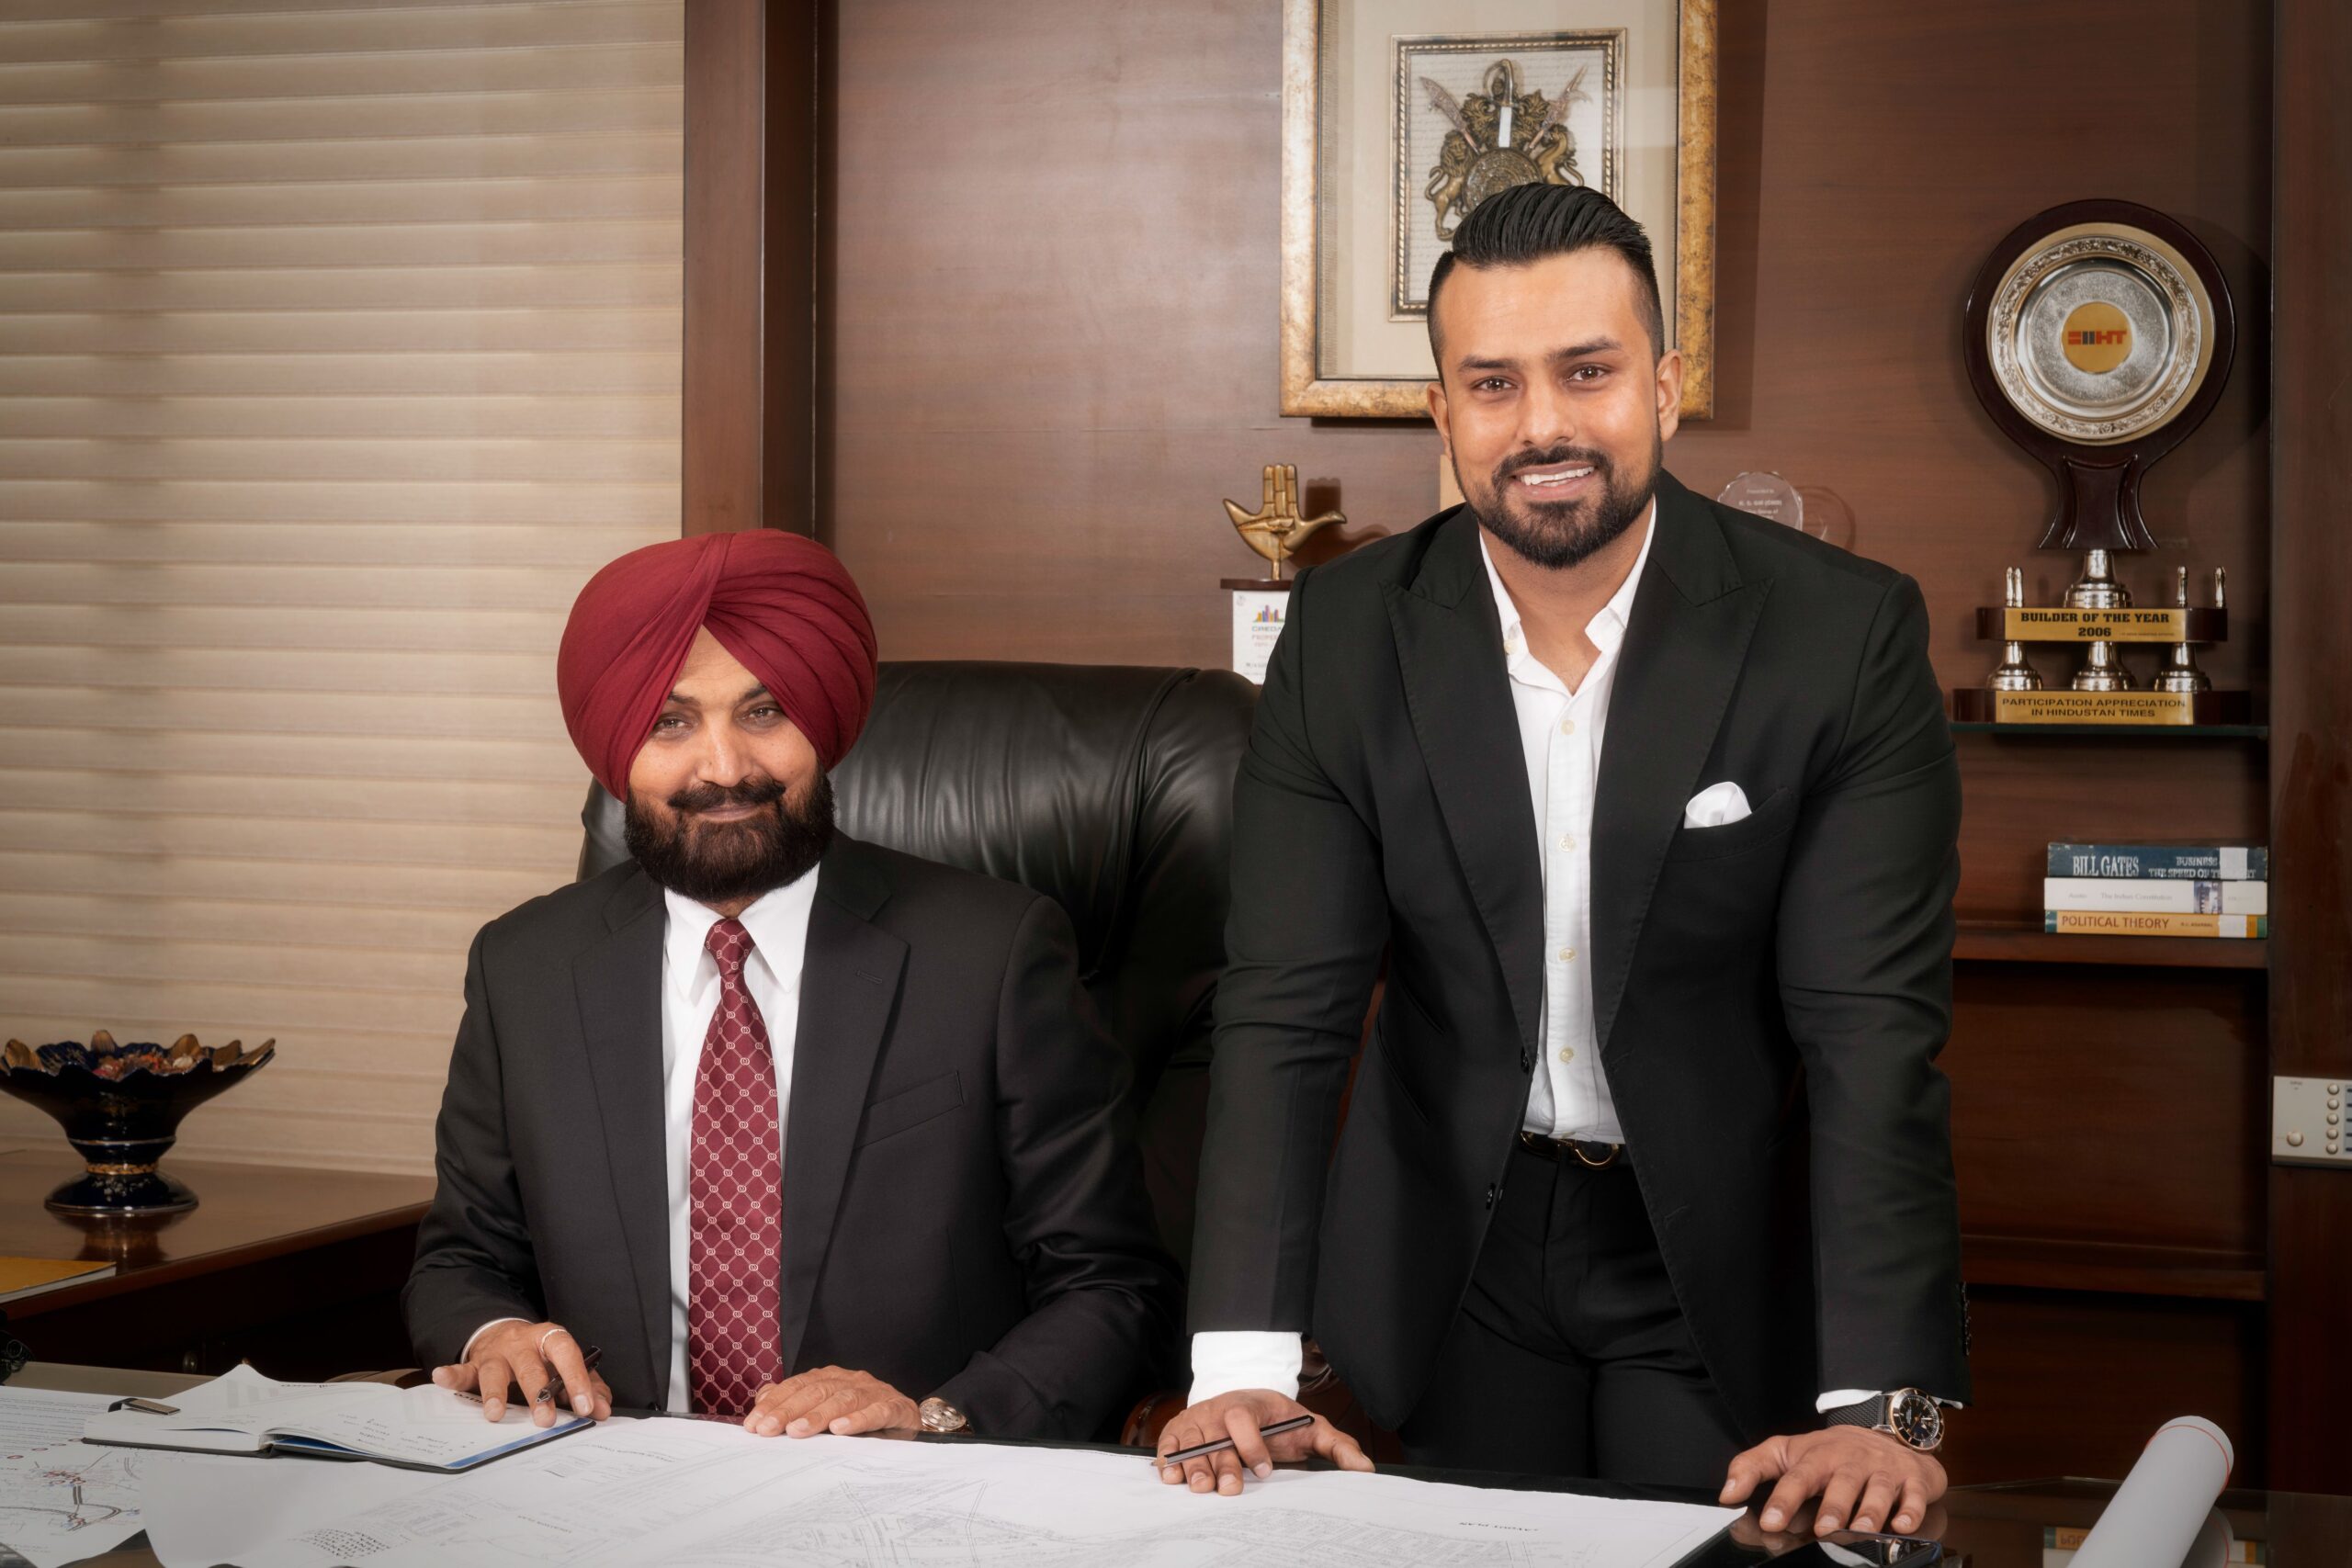 Tejpreet Gill – Building more than just four walls PaciBuilding more than just four walls Pacing in the new world of Luxurious and Sustainable Development with structures that matter